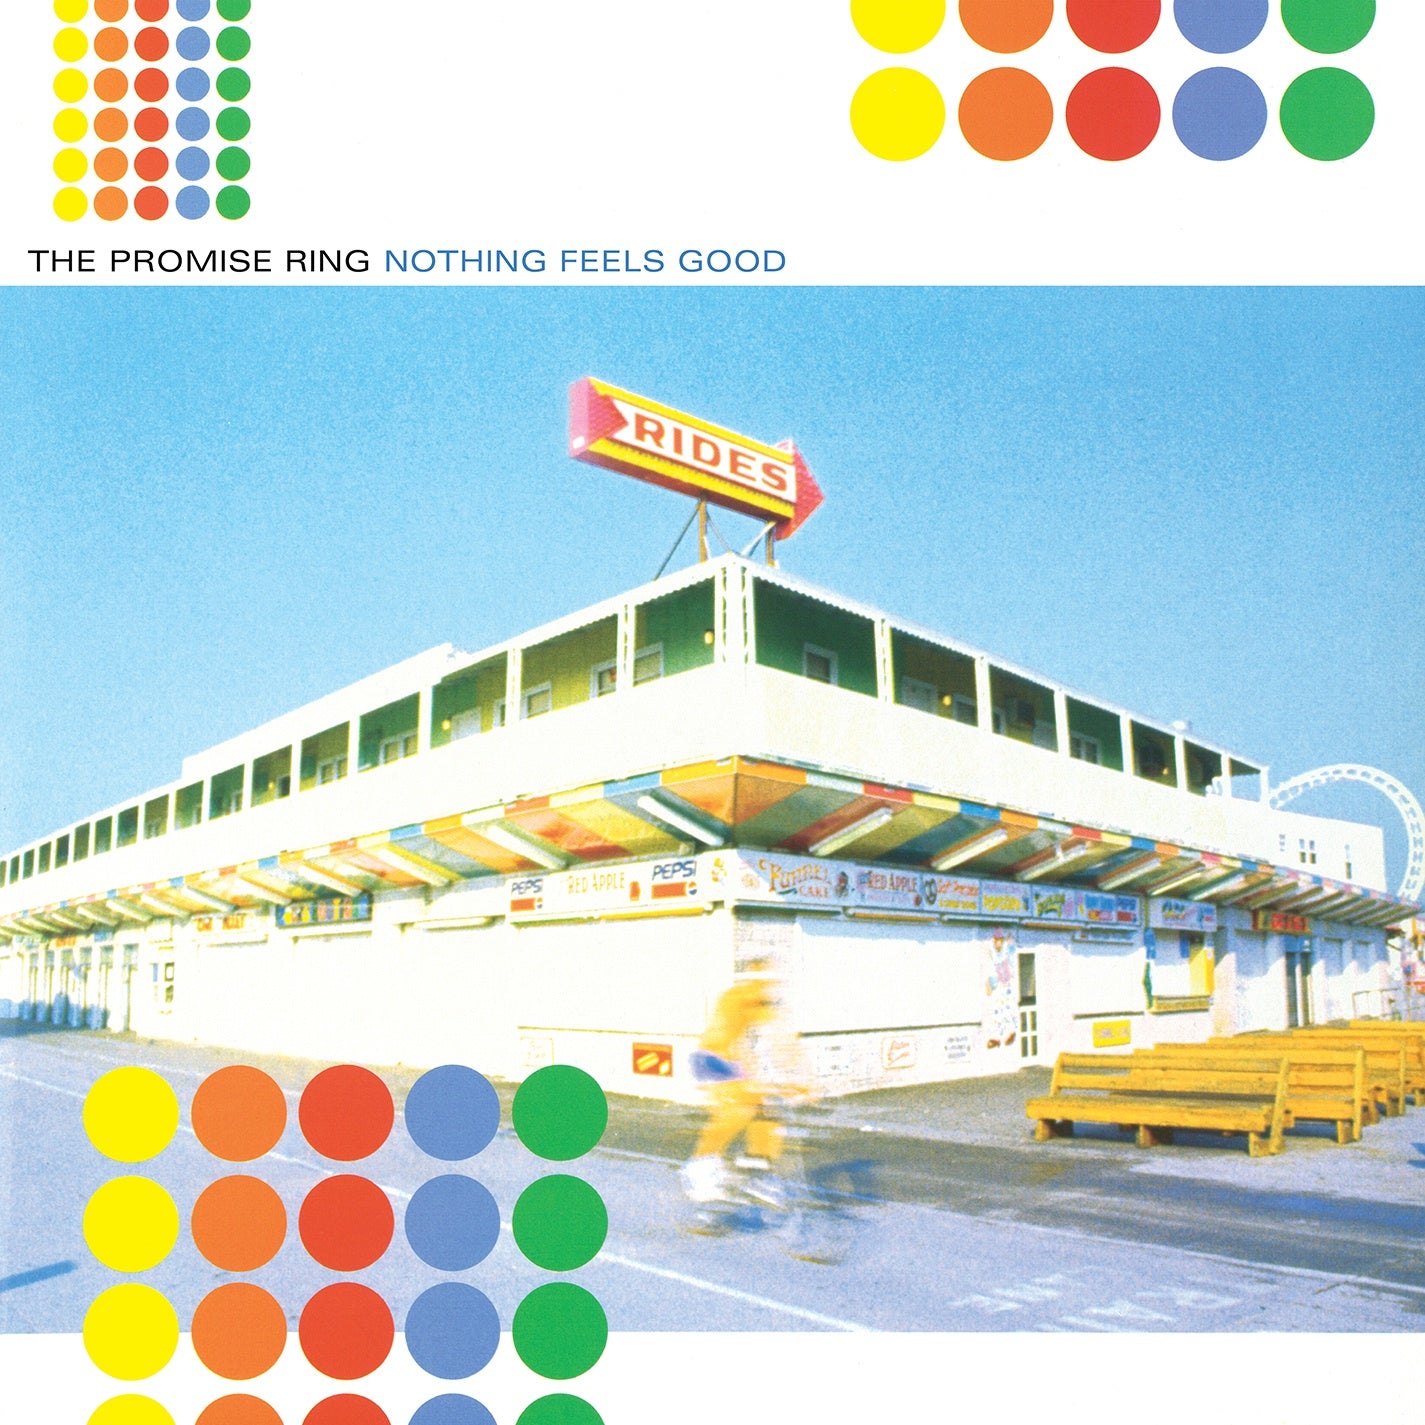 The Promise Ring - Nothing Feels Good (1997) - New Vinyl Lp 2018 Epitaph Limited Edition Reissue on Clear Vinyl - Emo